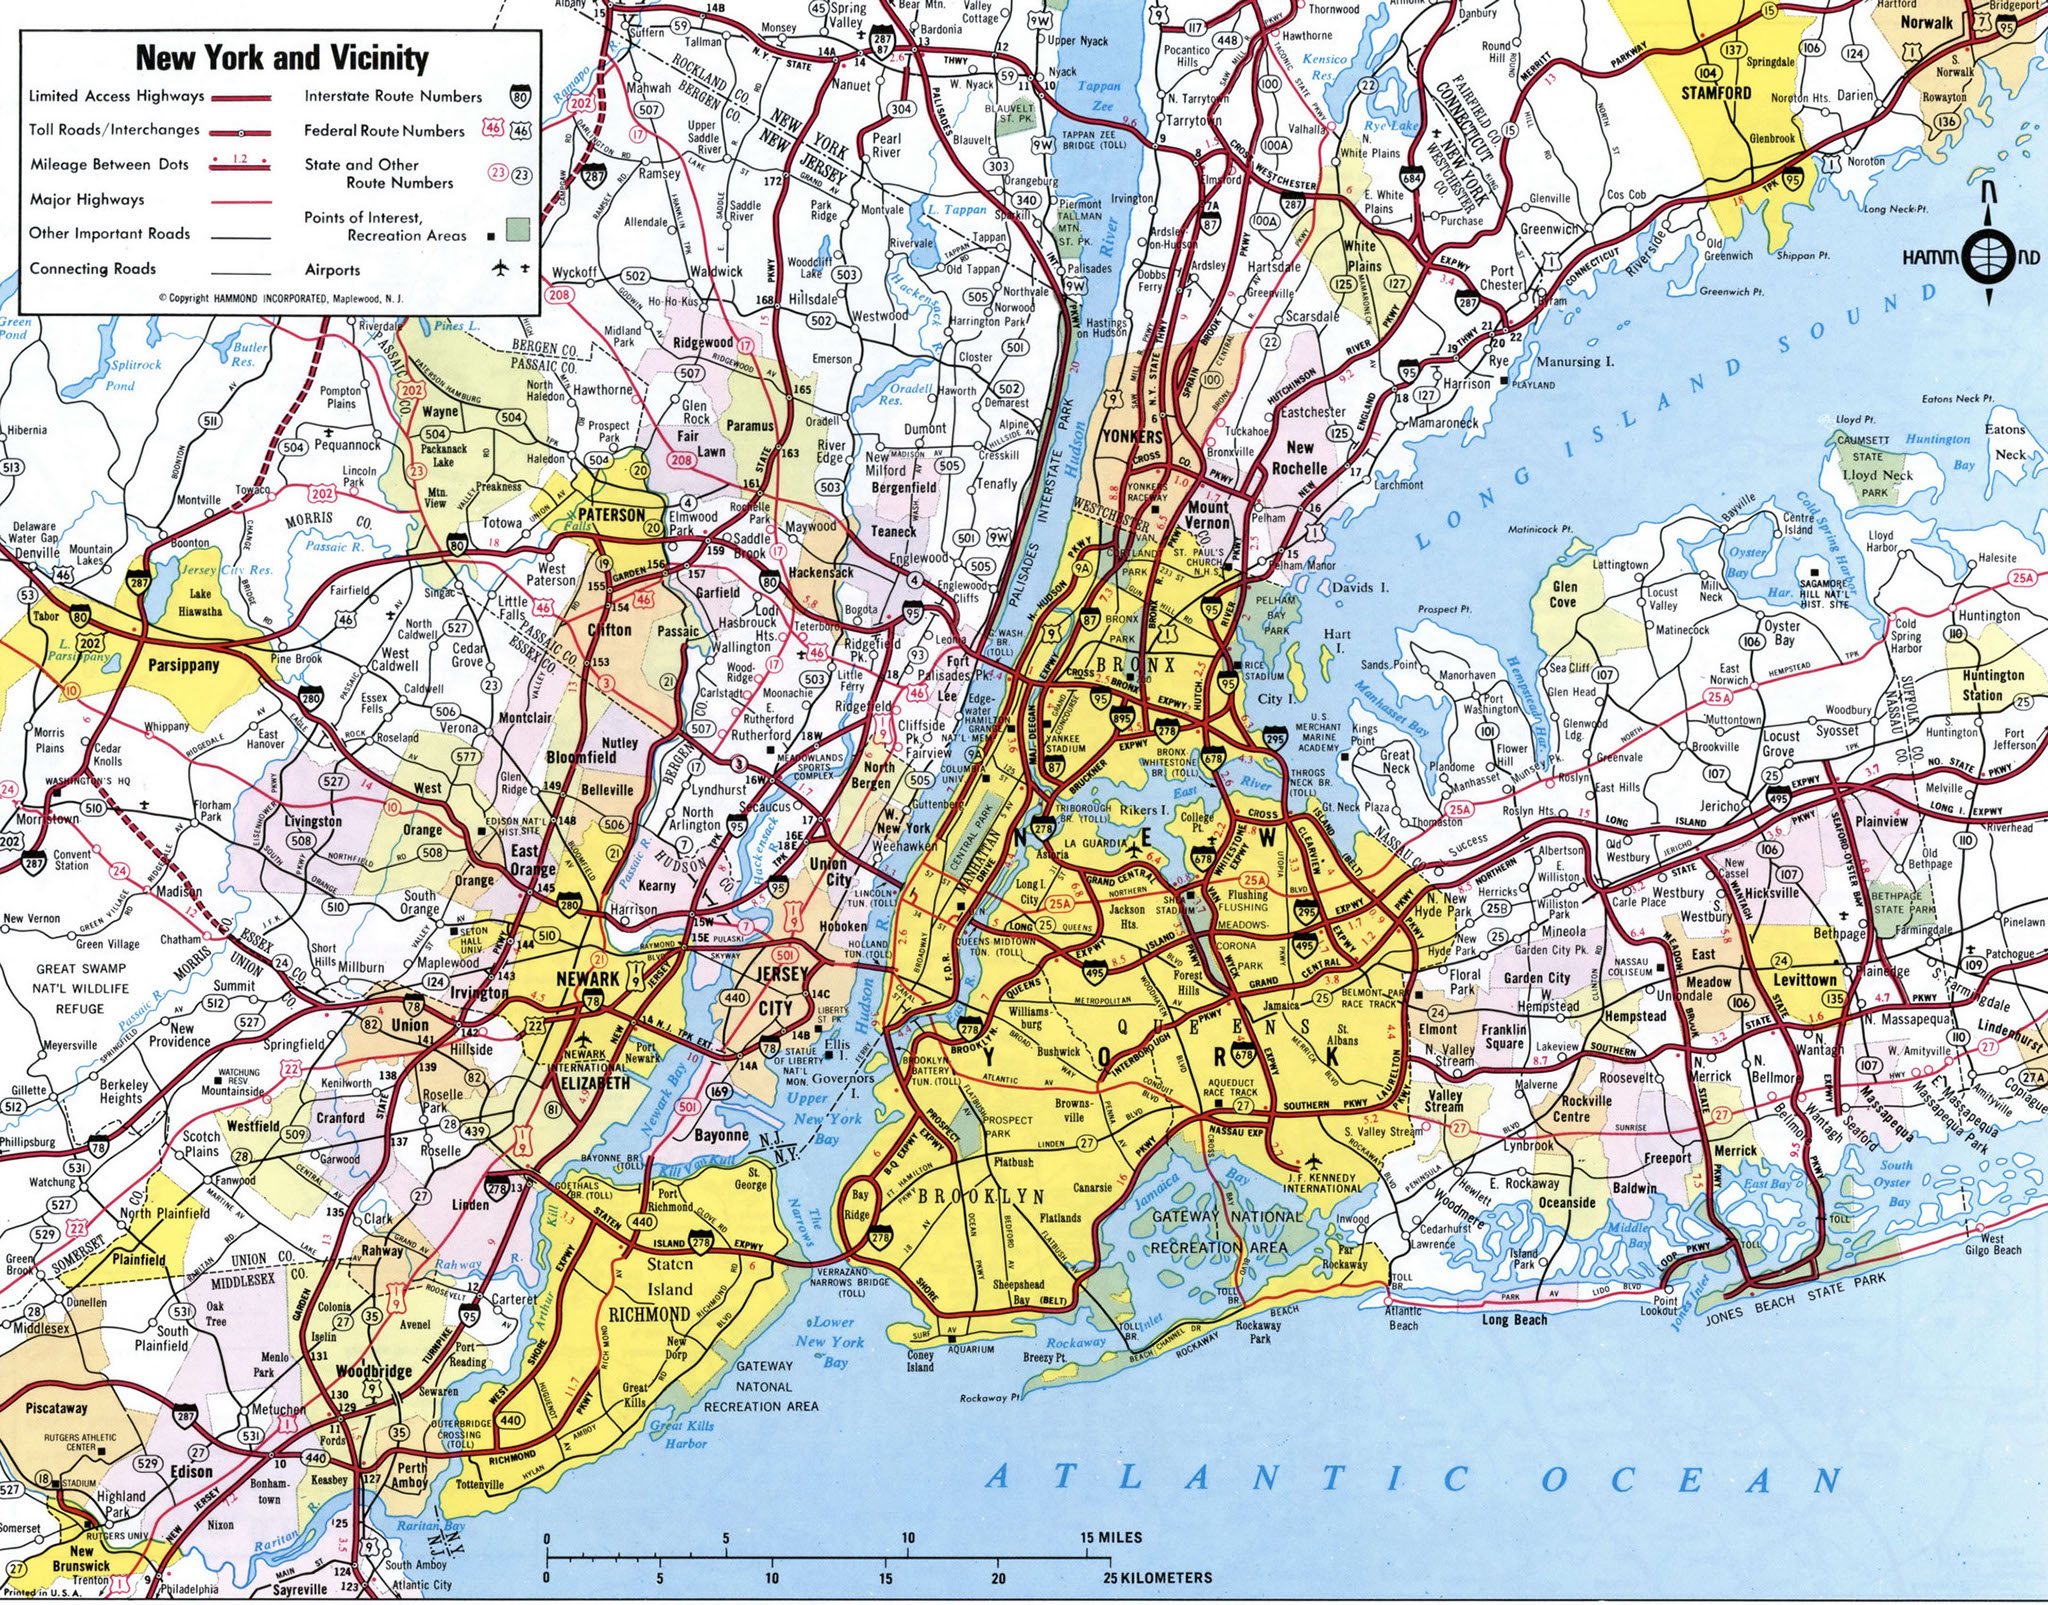 New York and Vicinity roads map